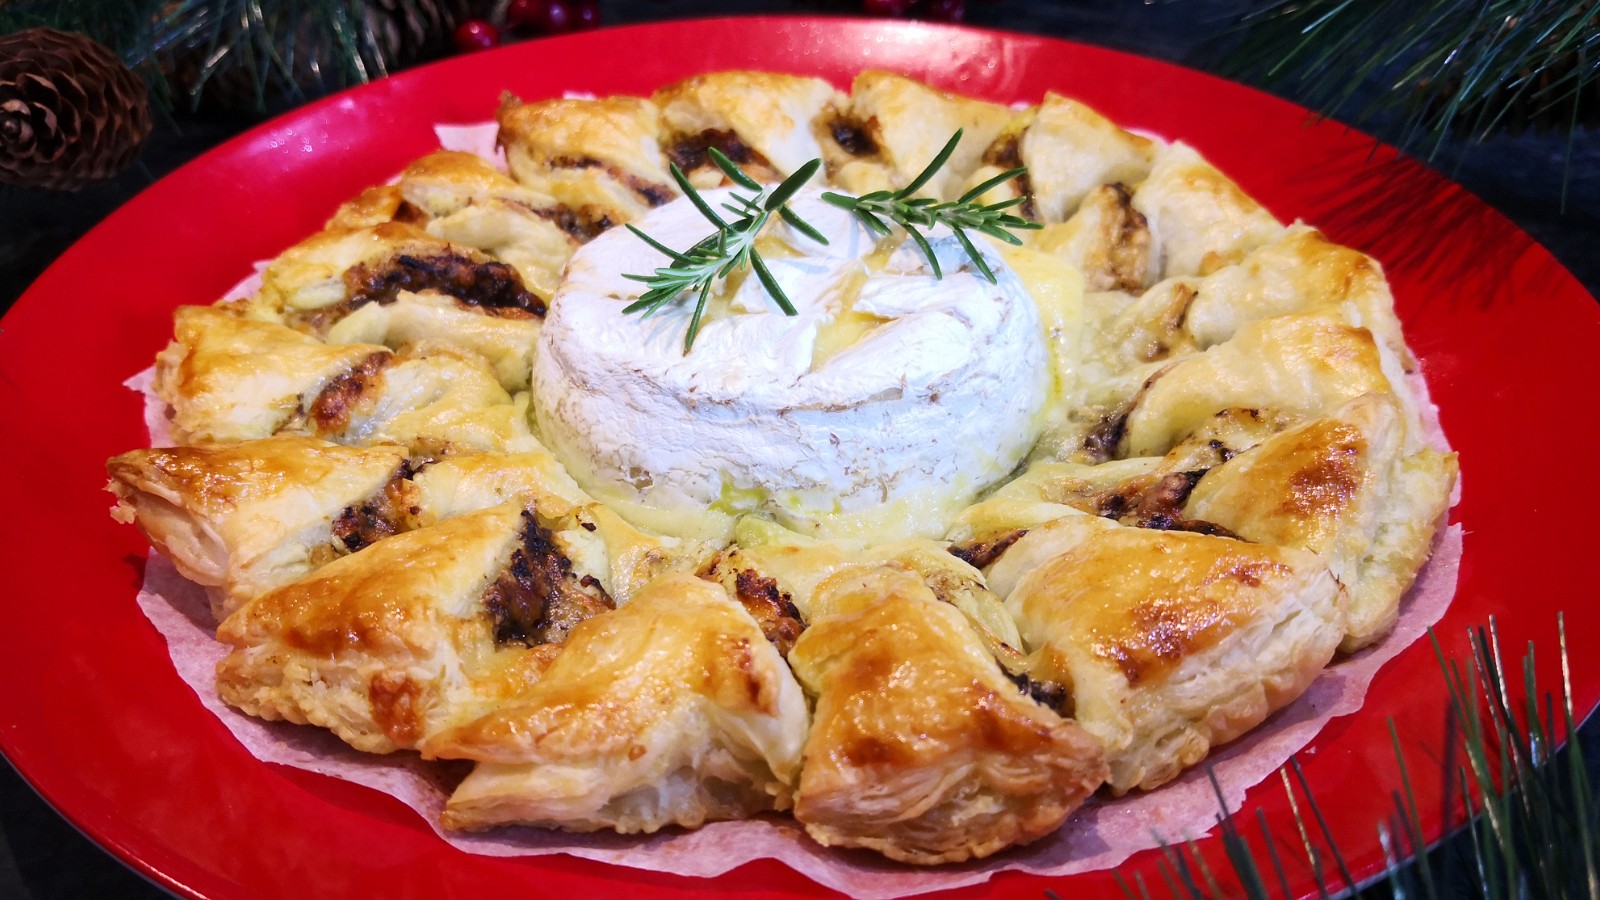 Image of Baked Camembert with Black Garlic Pastry Twists